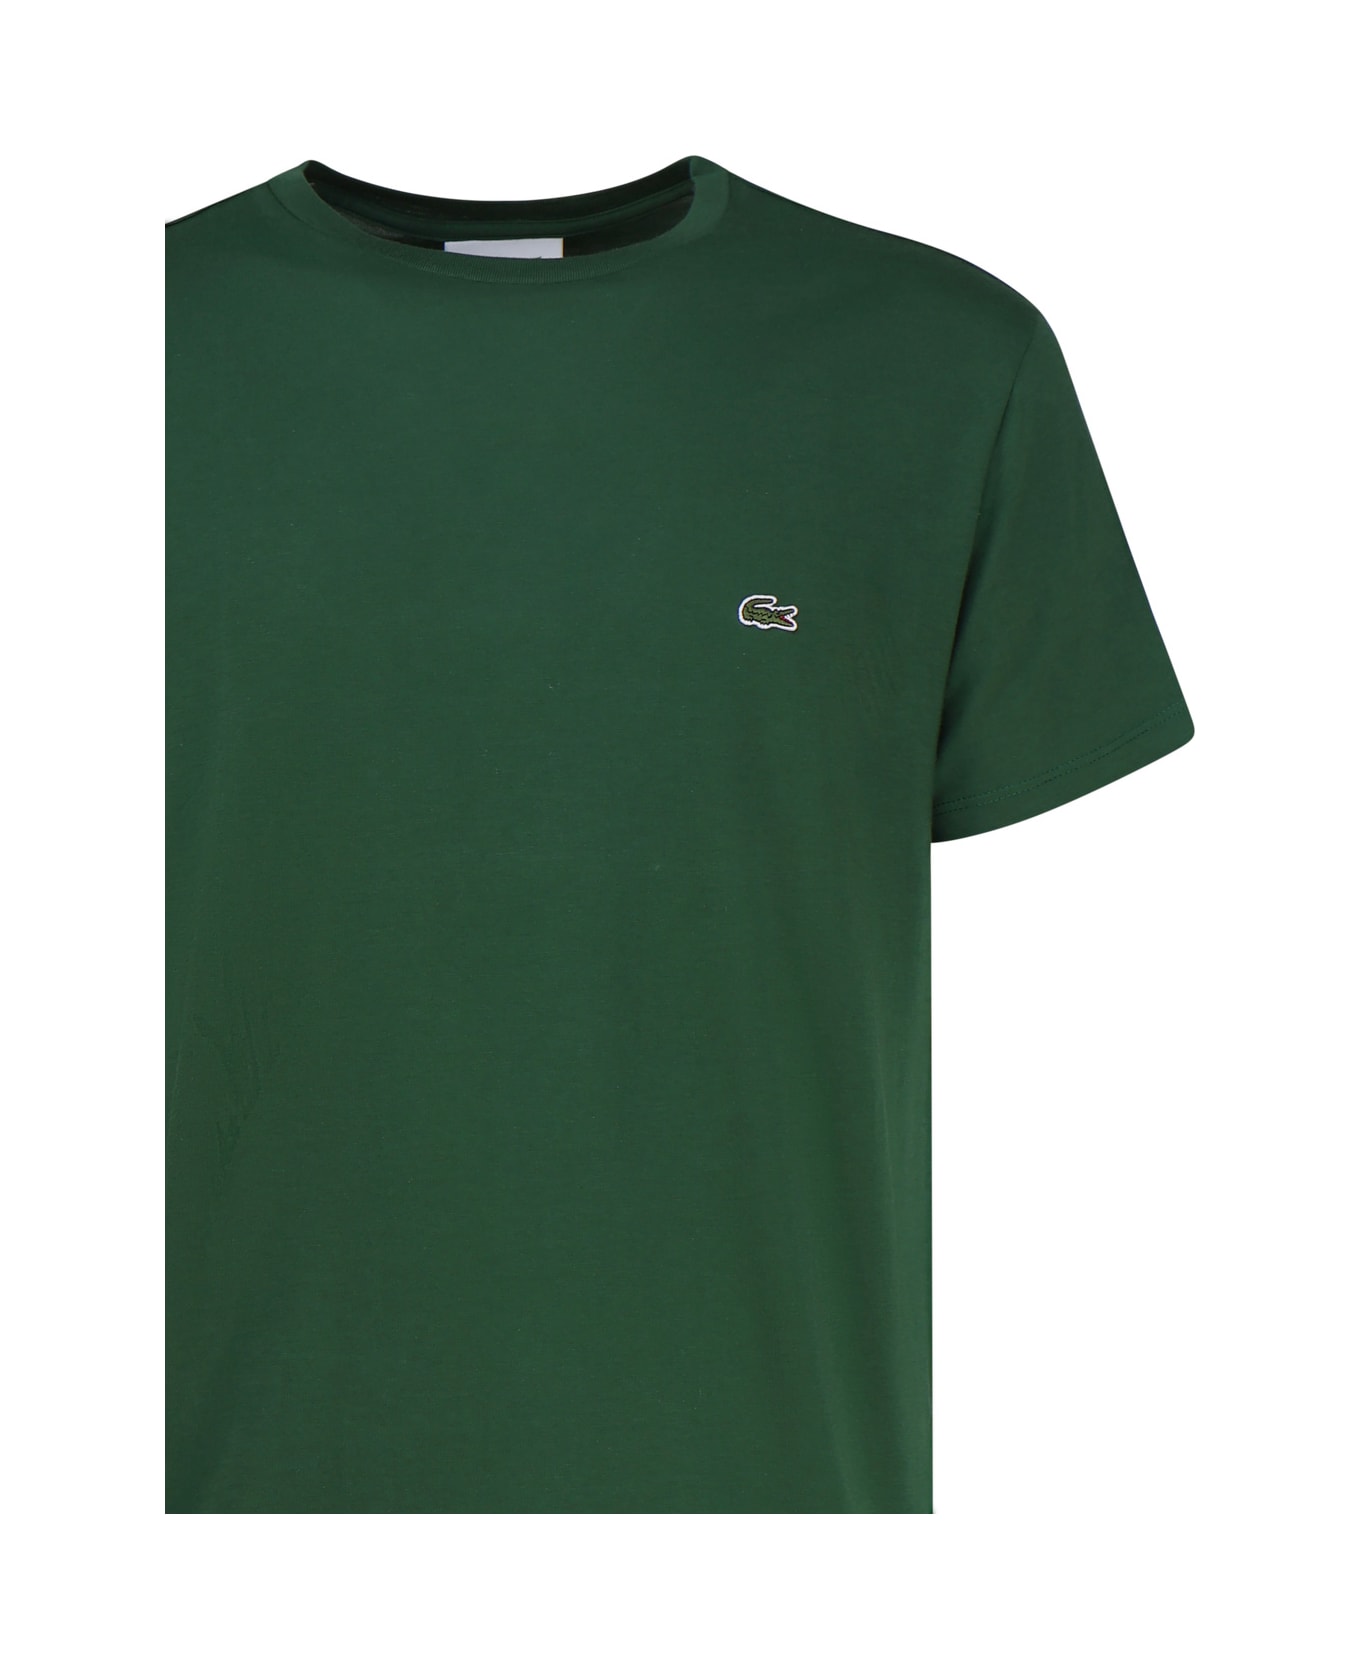 Lacoste Green T-shirt In Cotton Jersey - Verde シャツ